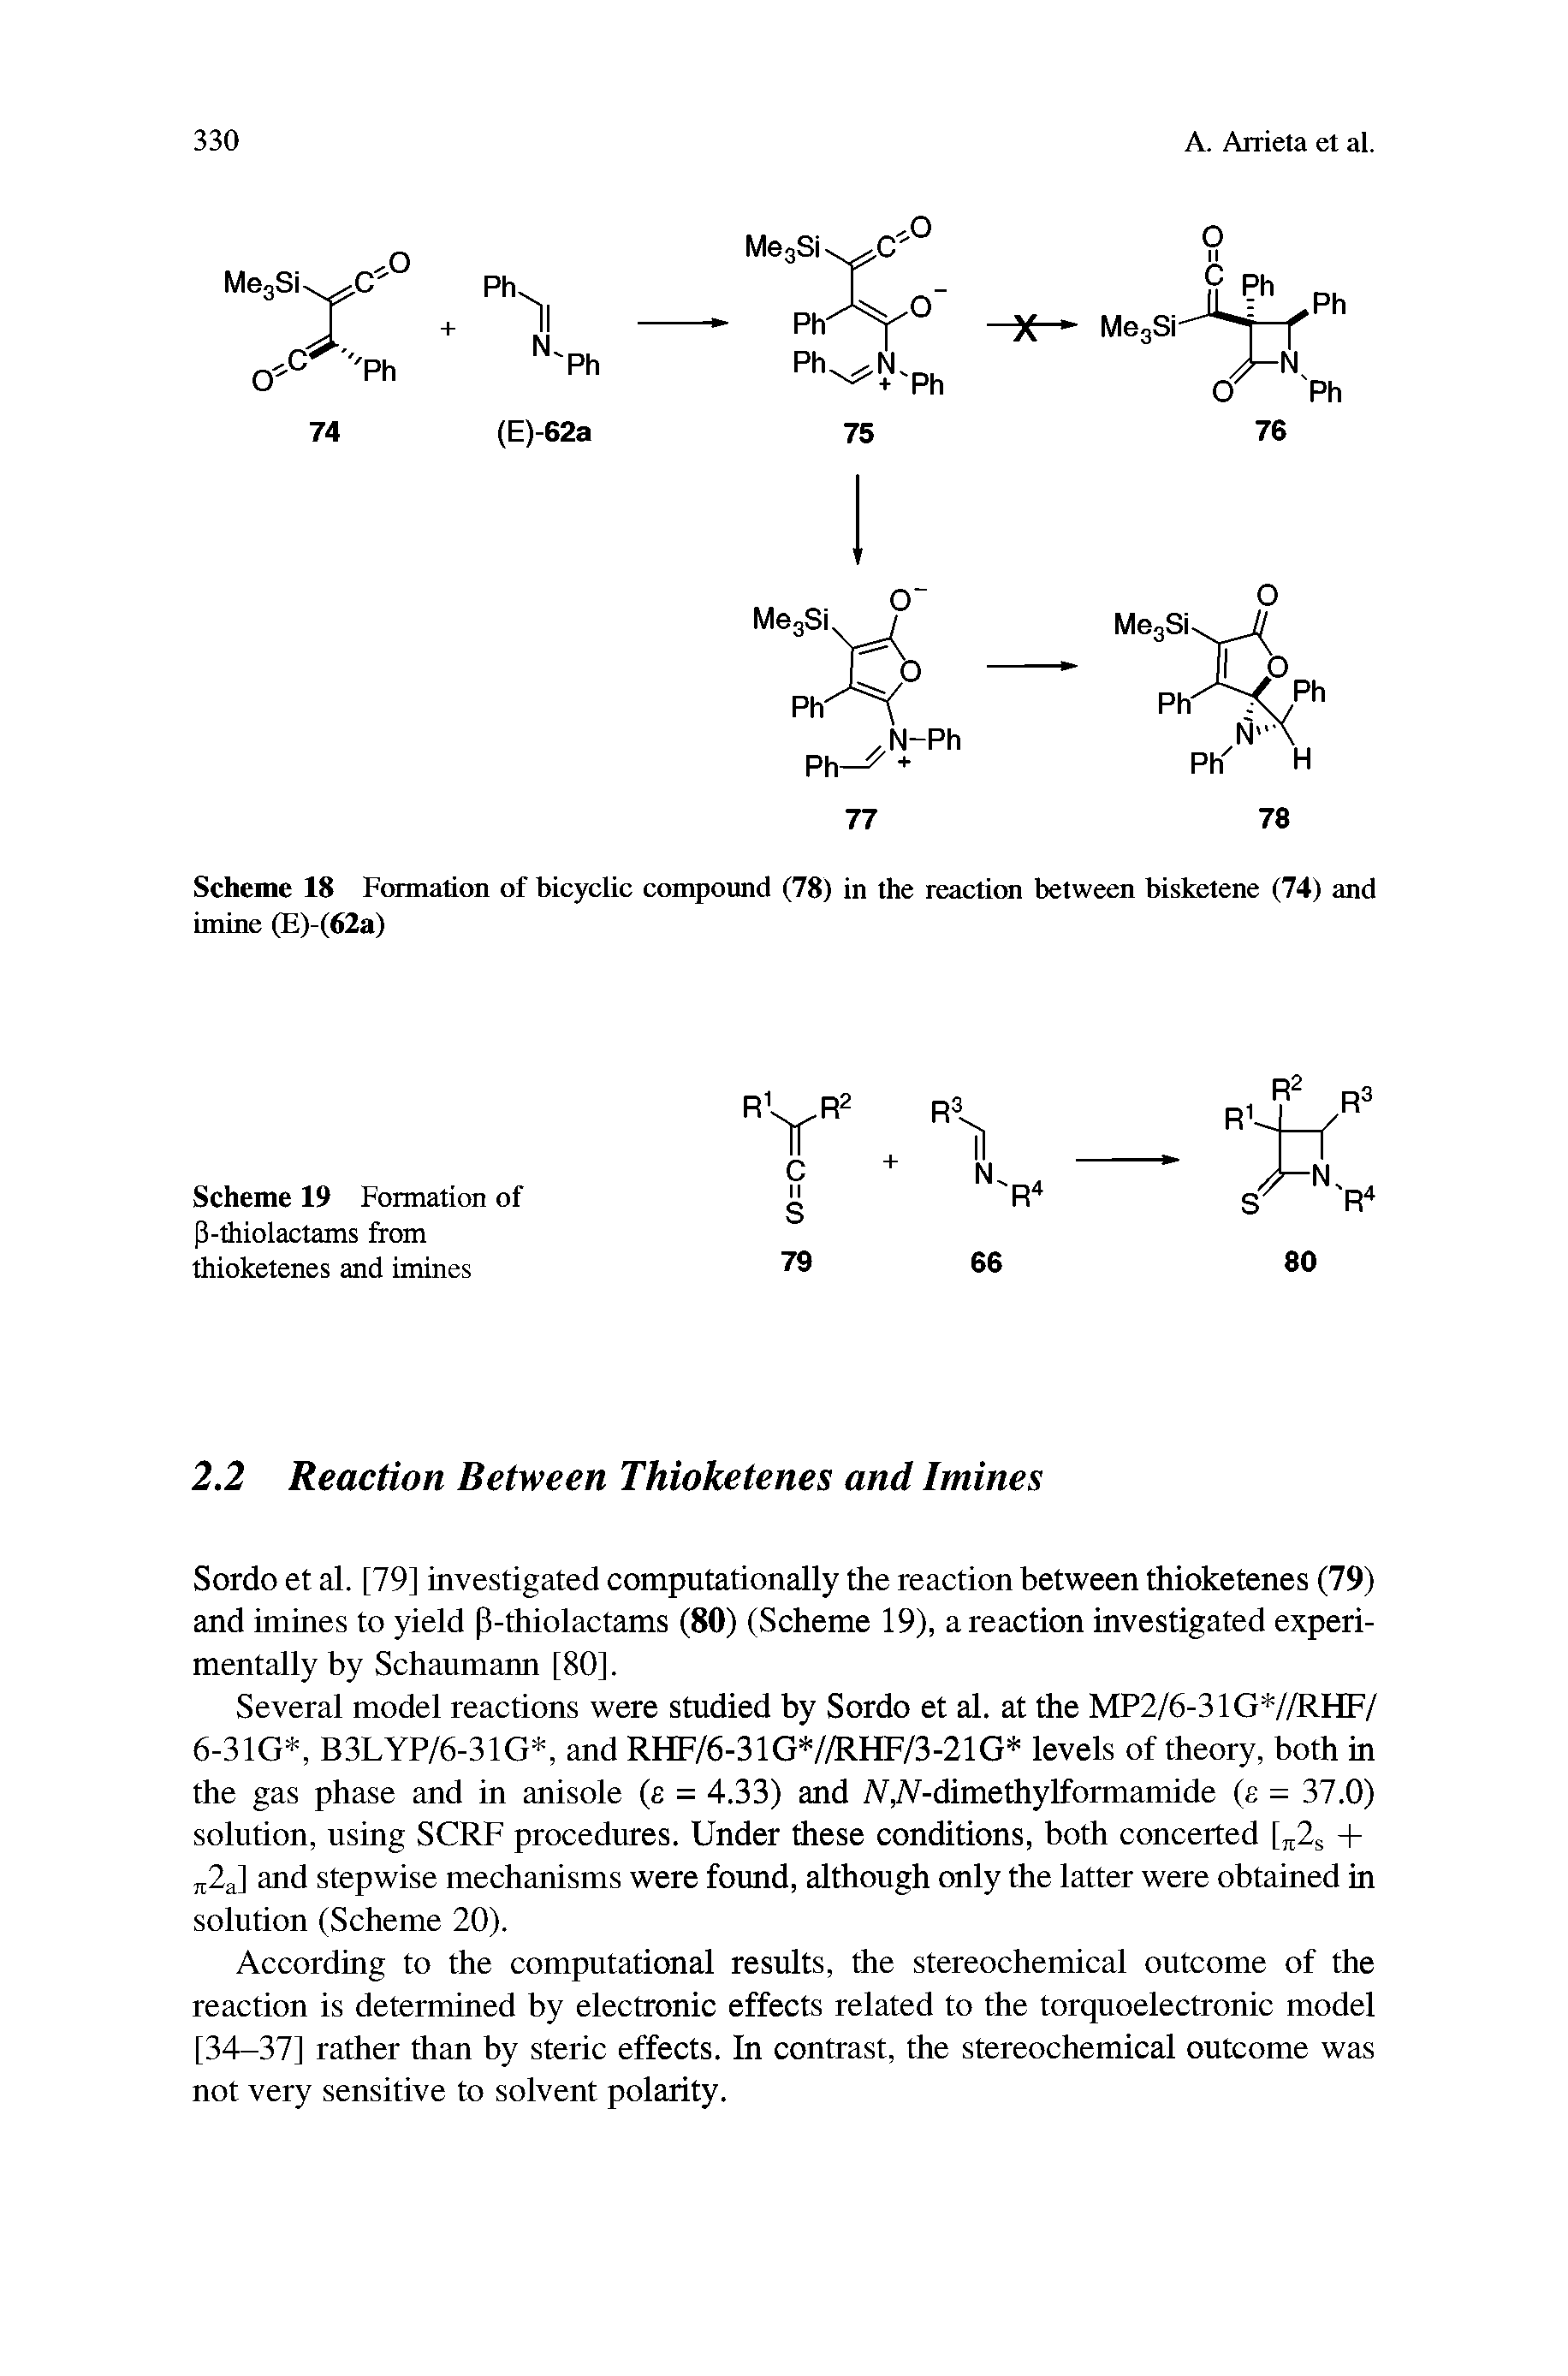 Scheme 18 Formation of bicyclic compound (78) in the reaction between bisketene (74) and imine (E)-(62a)...